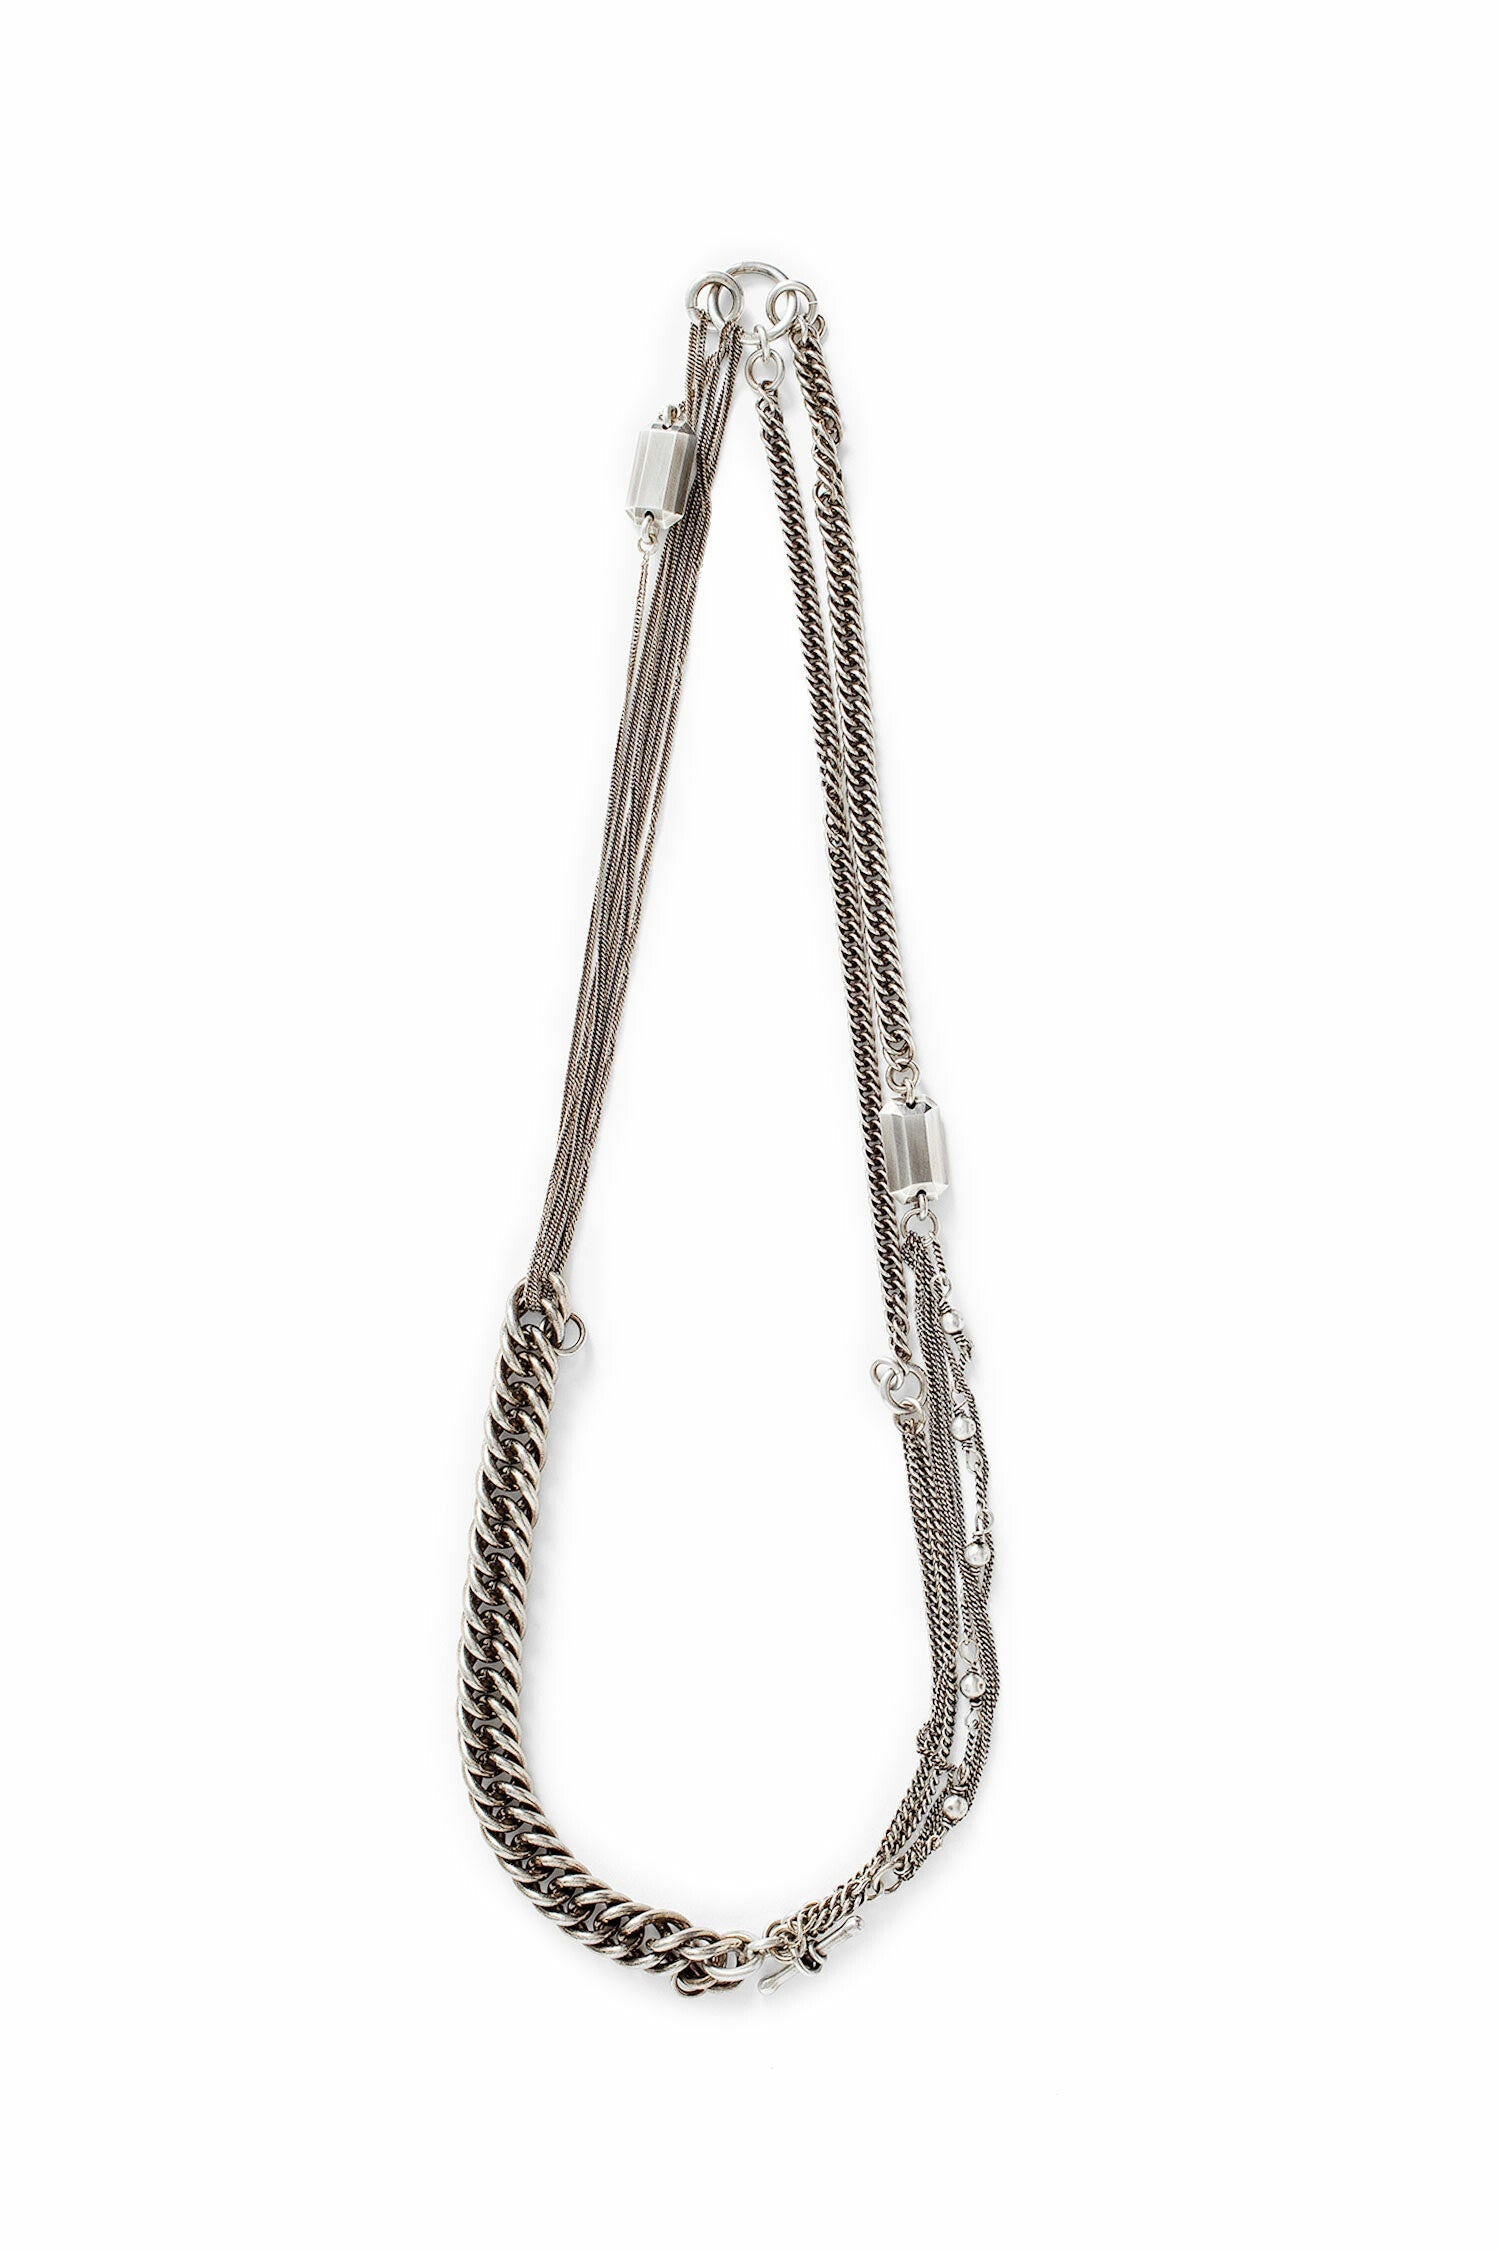 ANN DEMEULEMEESTER WOMAN SILVER NECKLACES - 1